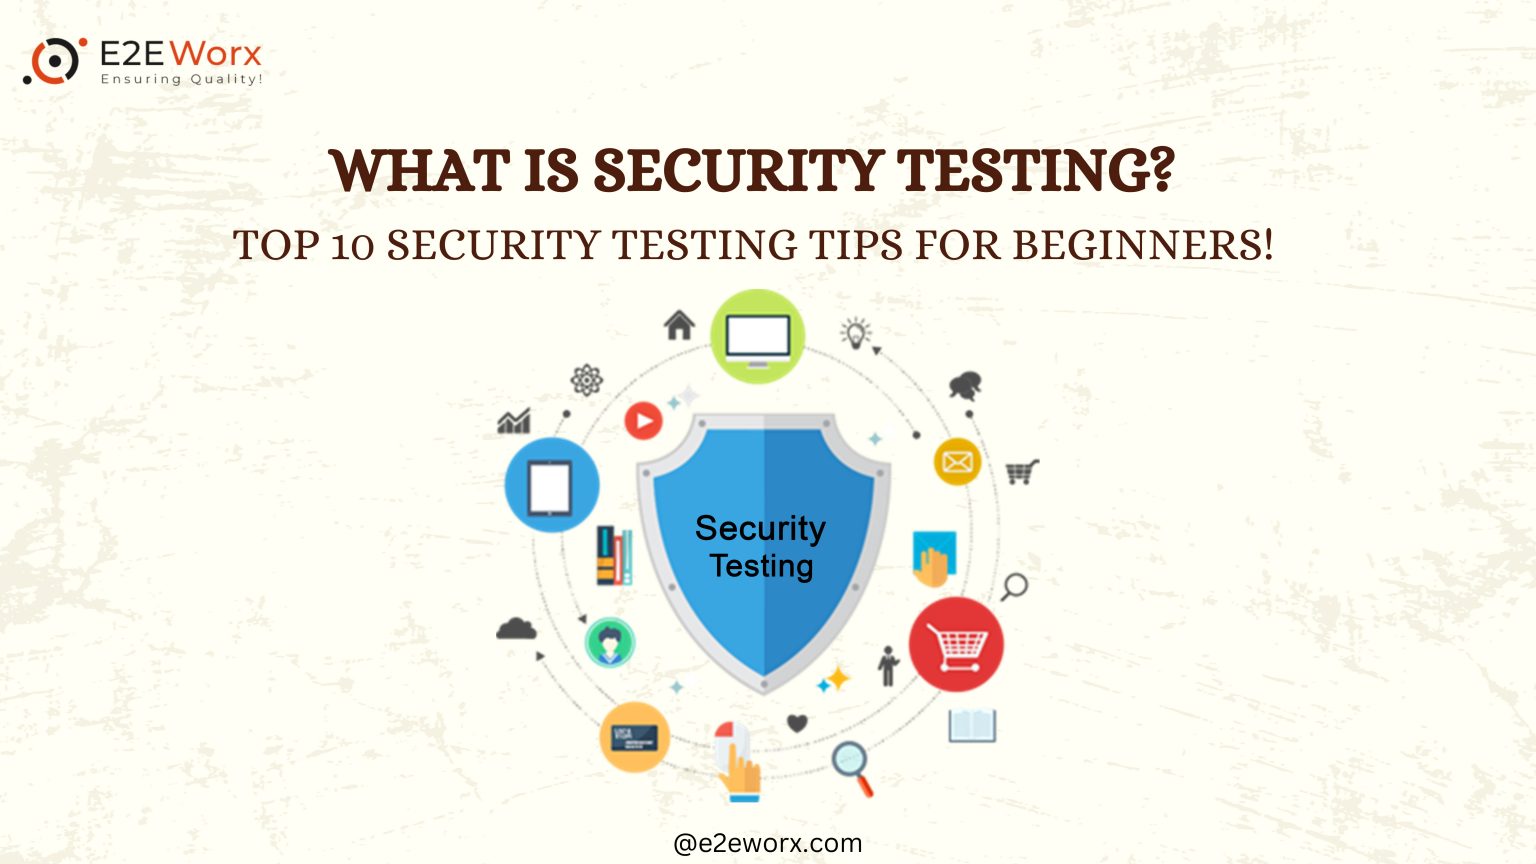 What is Security Testing Top 10 Security Testing Tips For Beginners - E2EWorx